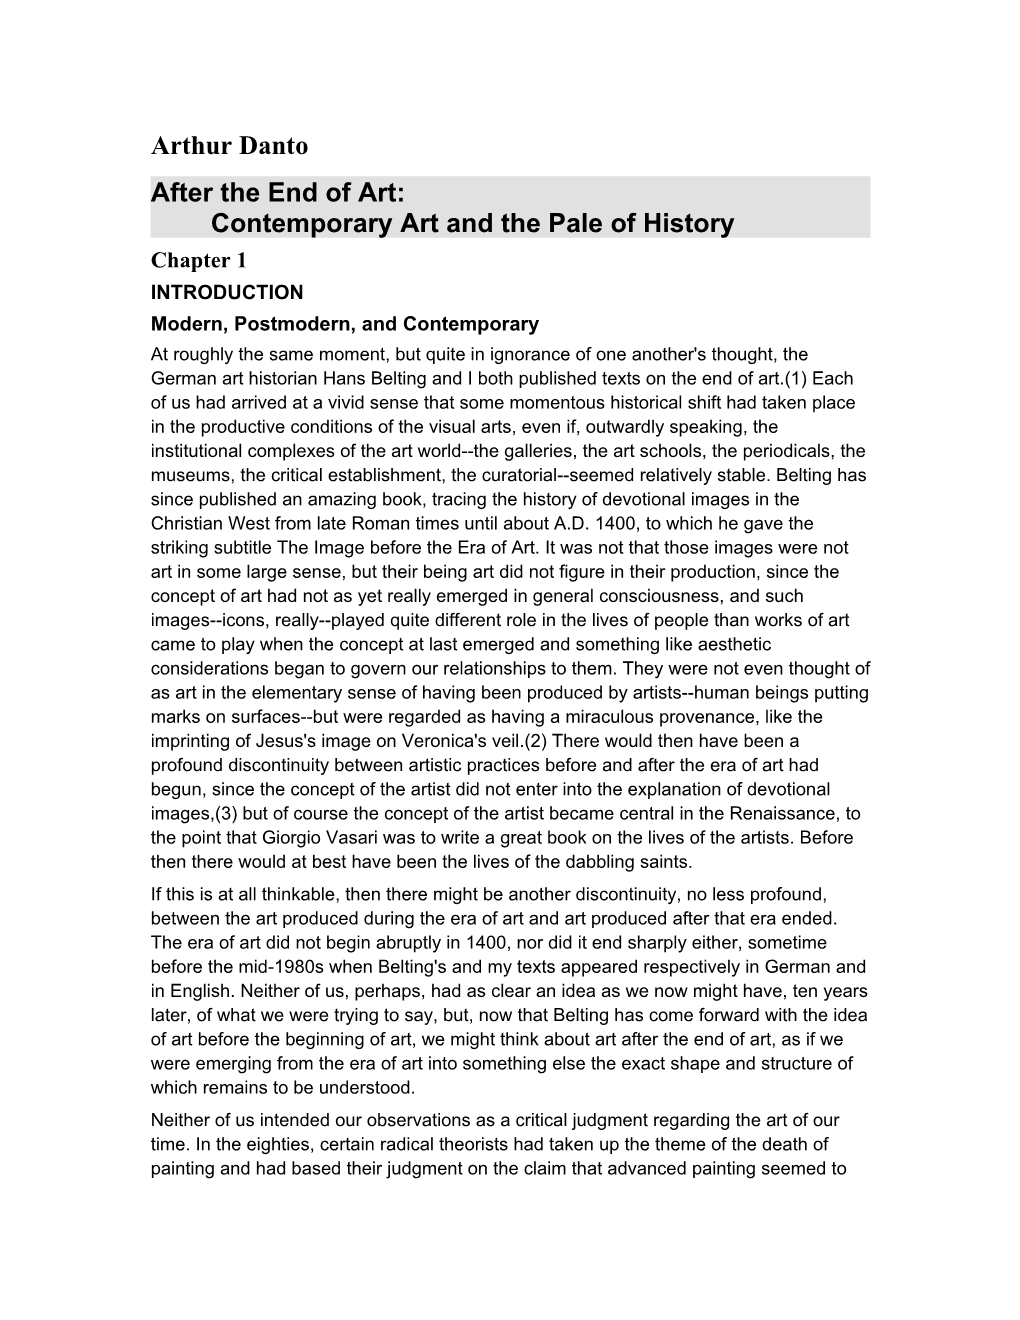 After the End of Art:Contemporary Art and the Pale of History